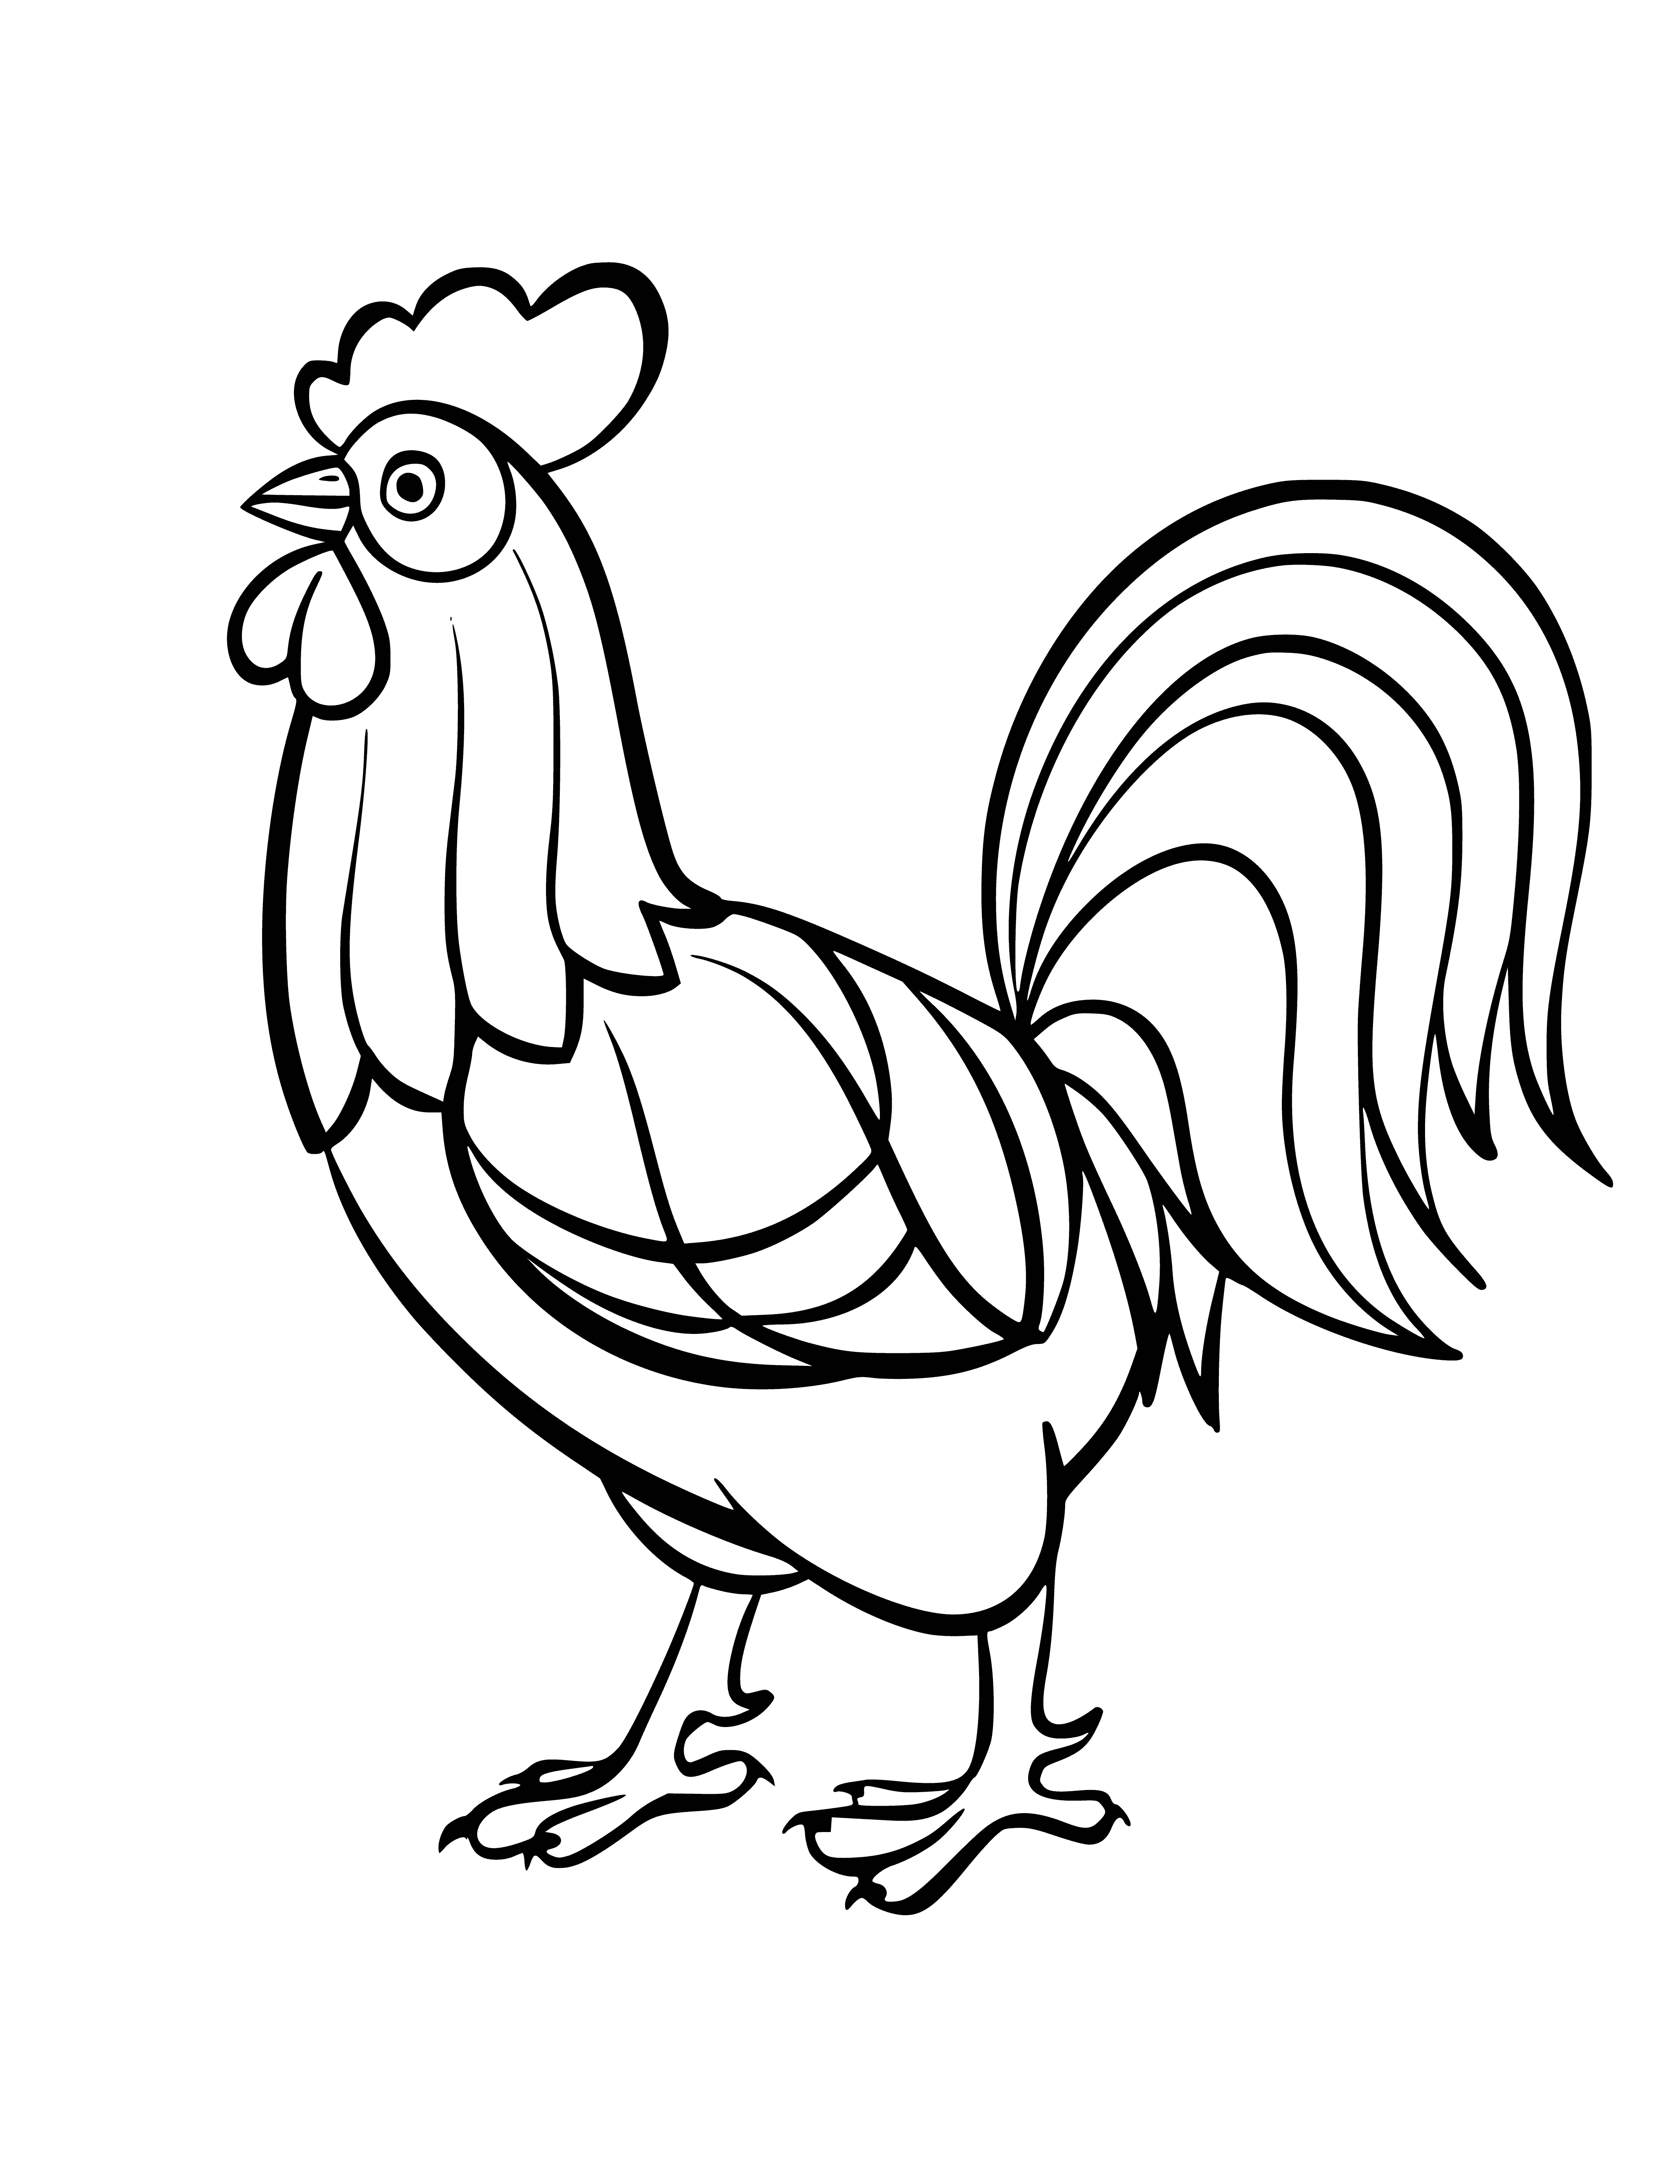 coloring page: Rooster in coloring page is brown & white, has long tail & comb, standing on fence.